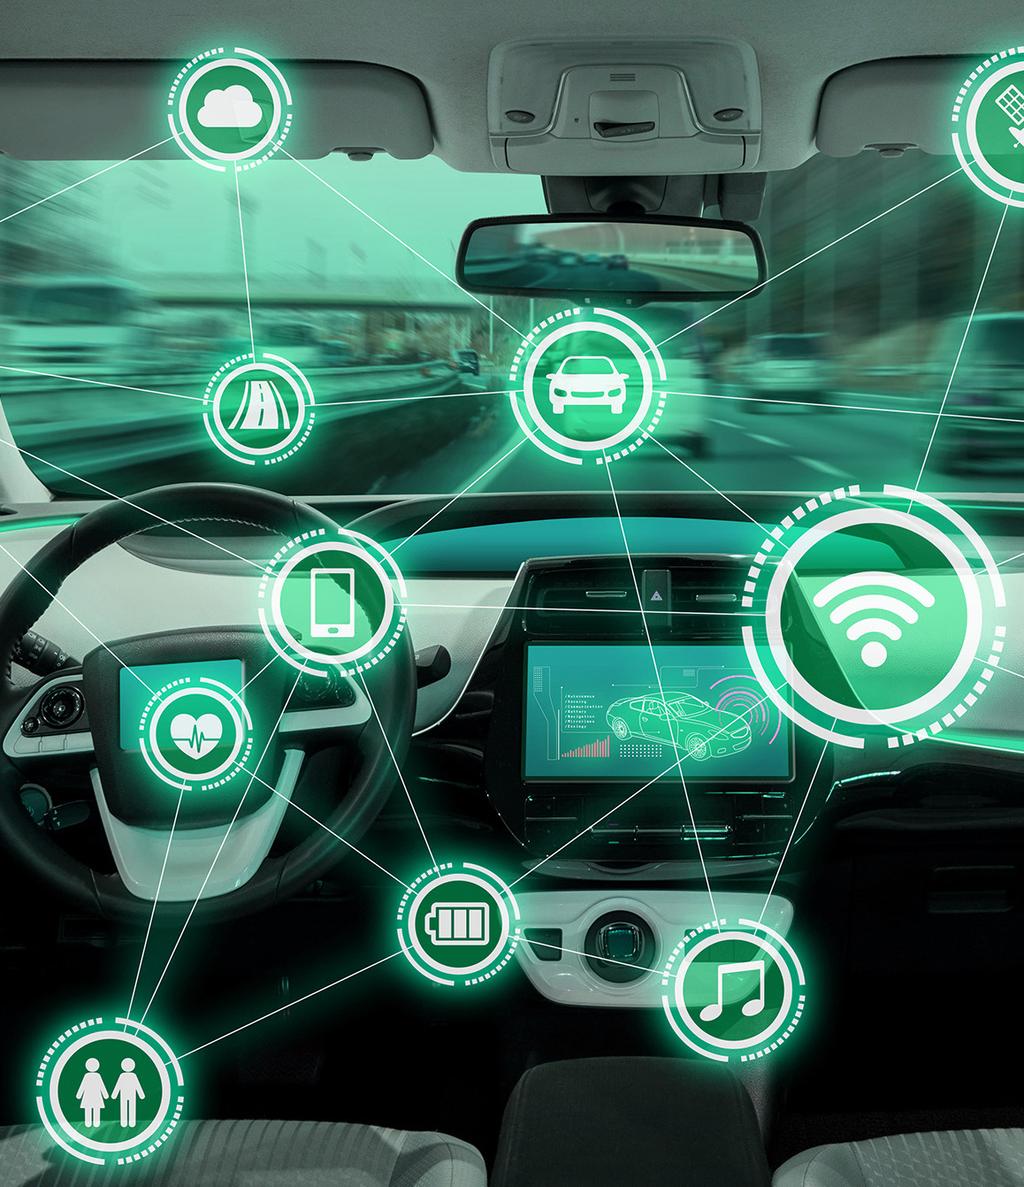 THE NEWSLETTER OF THE CONNECTED AUTOMATED DRIVING IN EUROPE INITIATIVE ISSUE N 4 FEBRUARY 2018 Into 2018 Moving Forward to Automated Driving